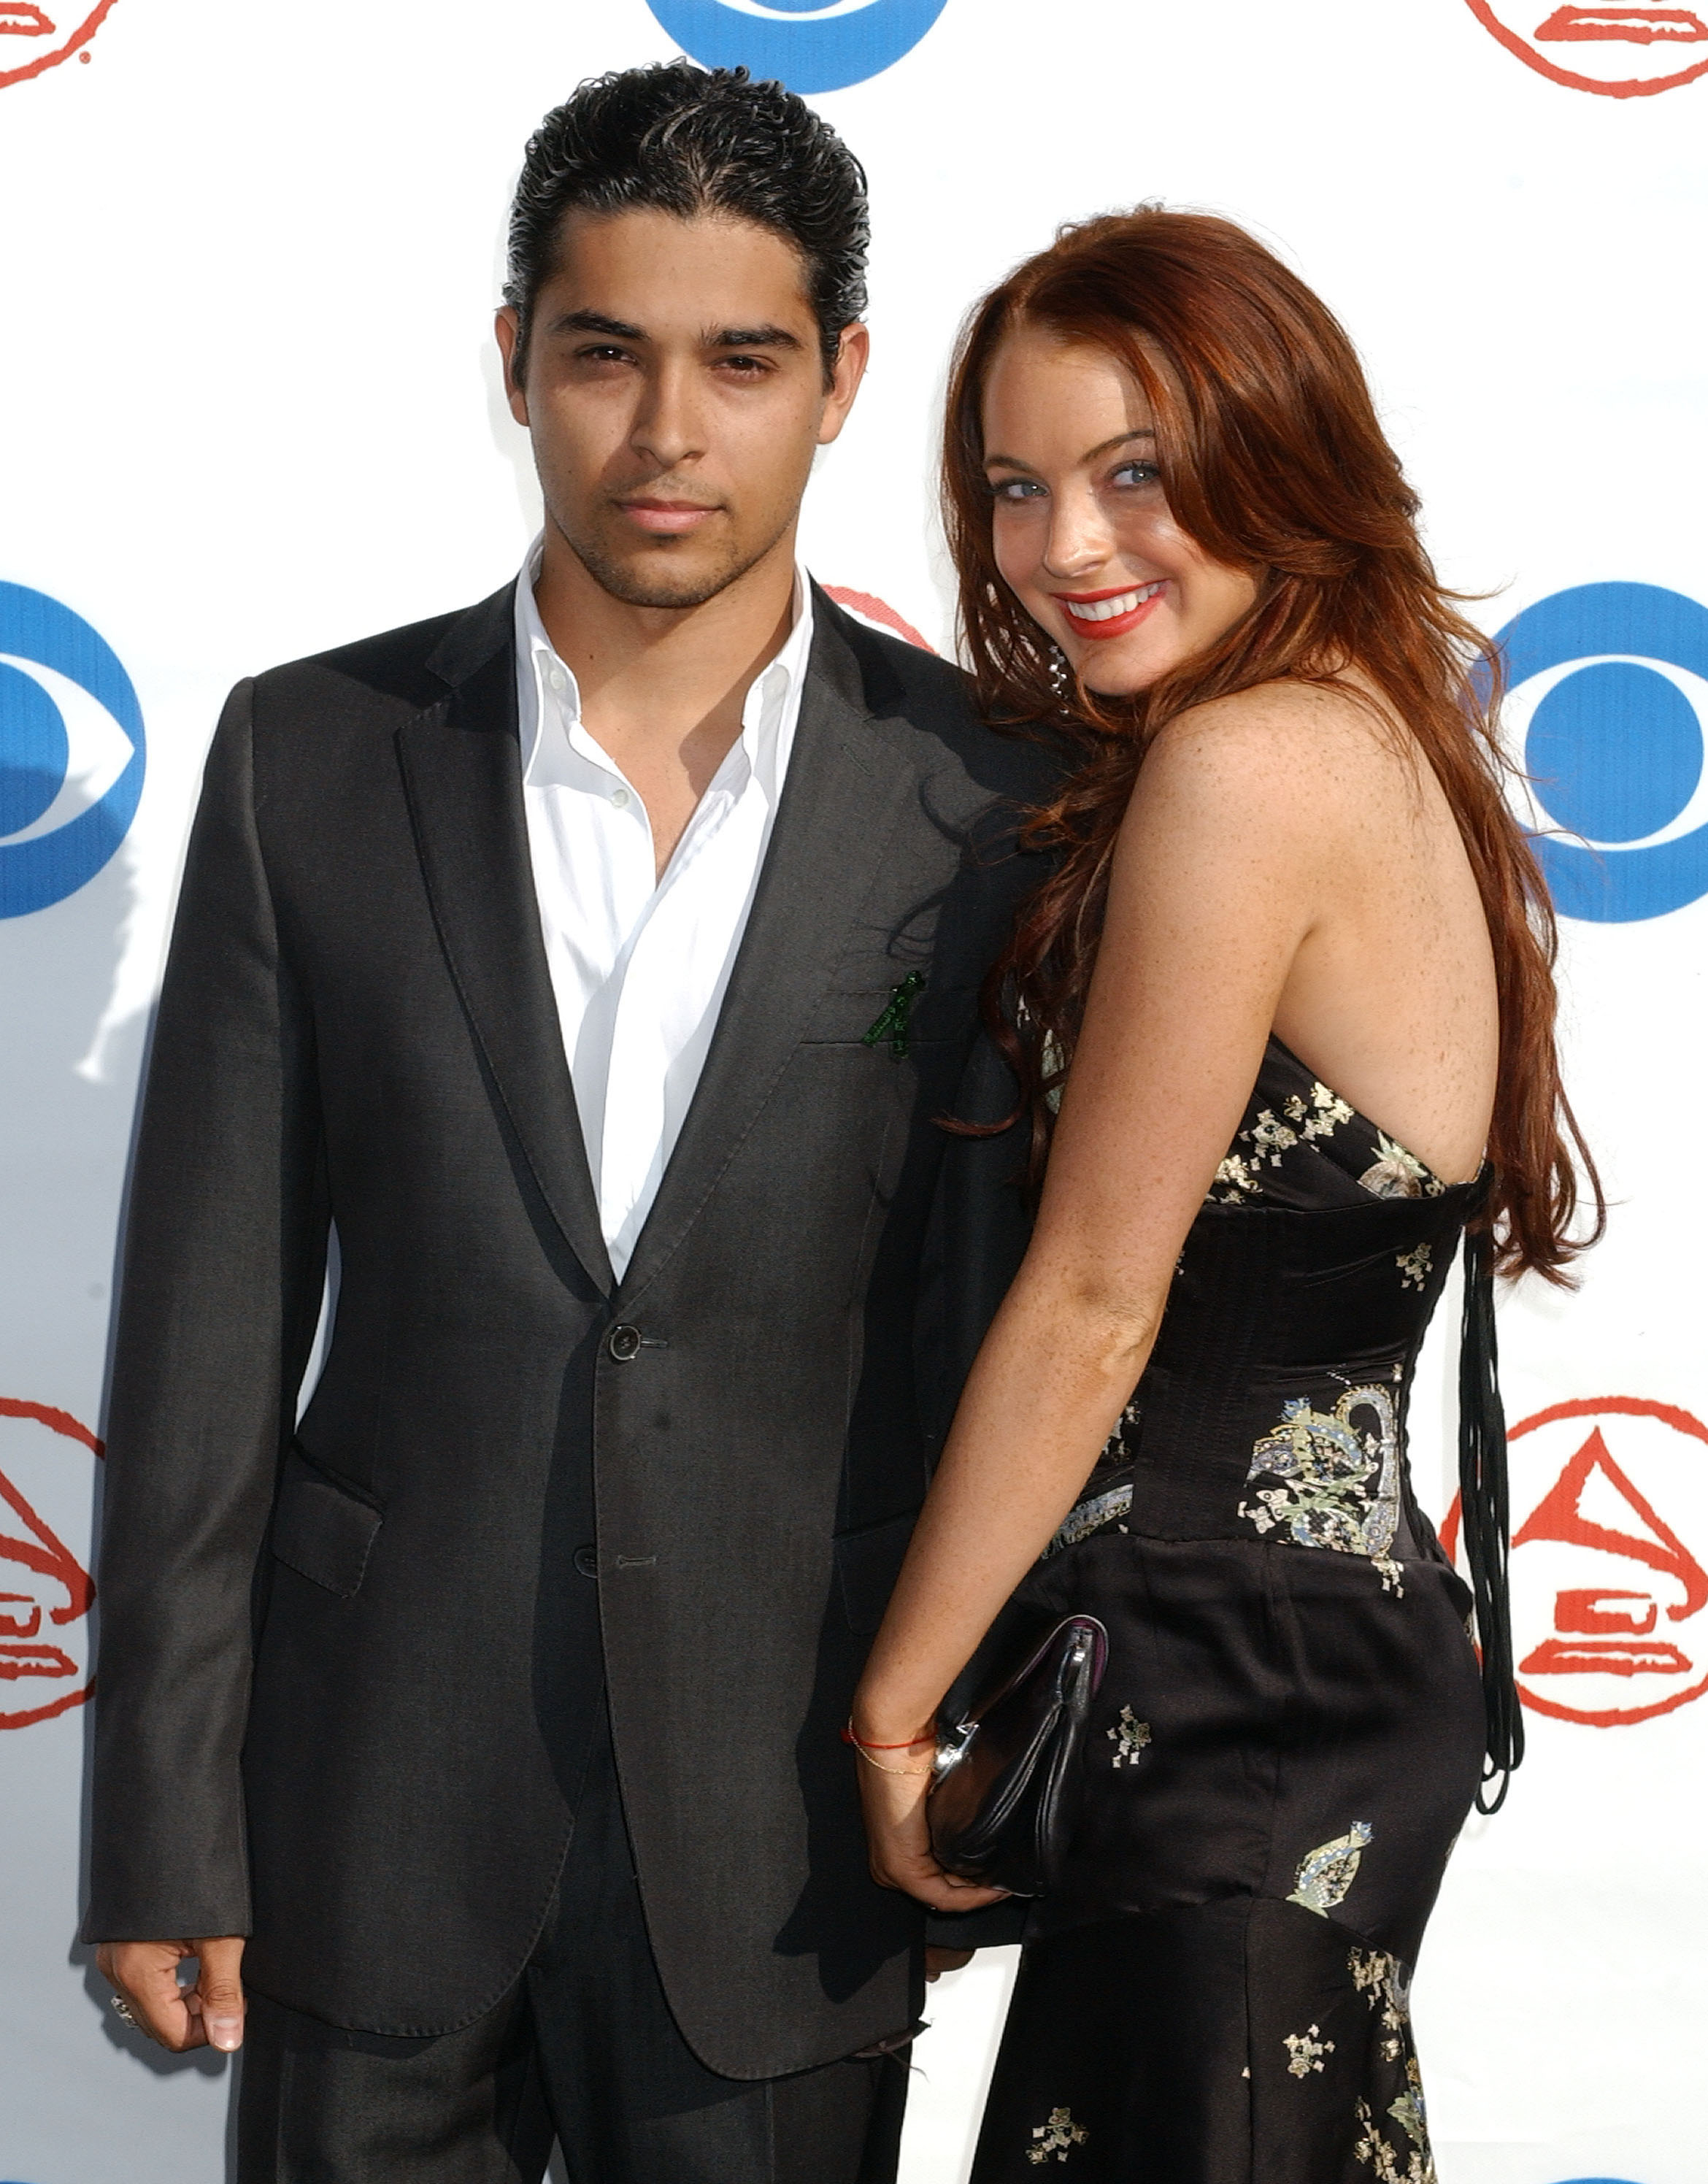 Wilmer in a suit and Lindsay in an embroidered dress, posing together at an event